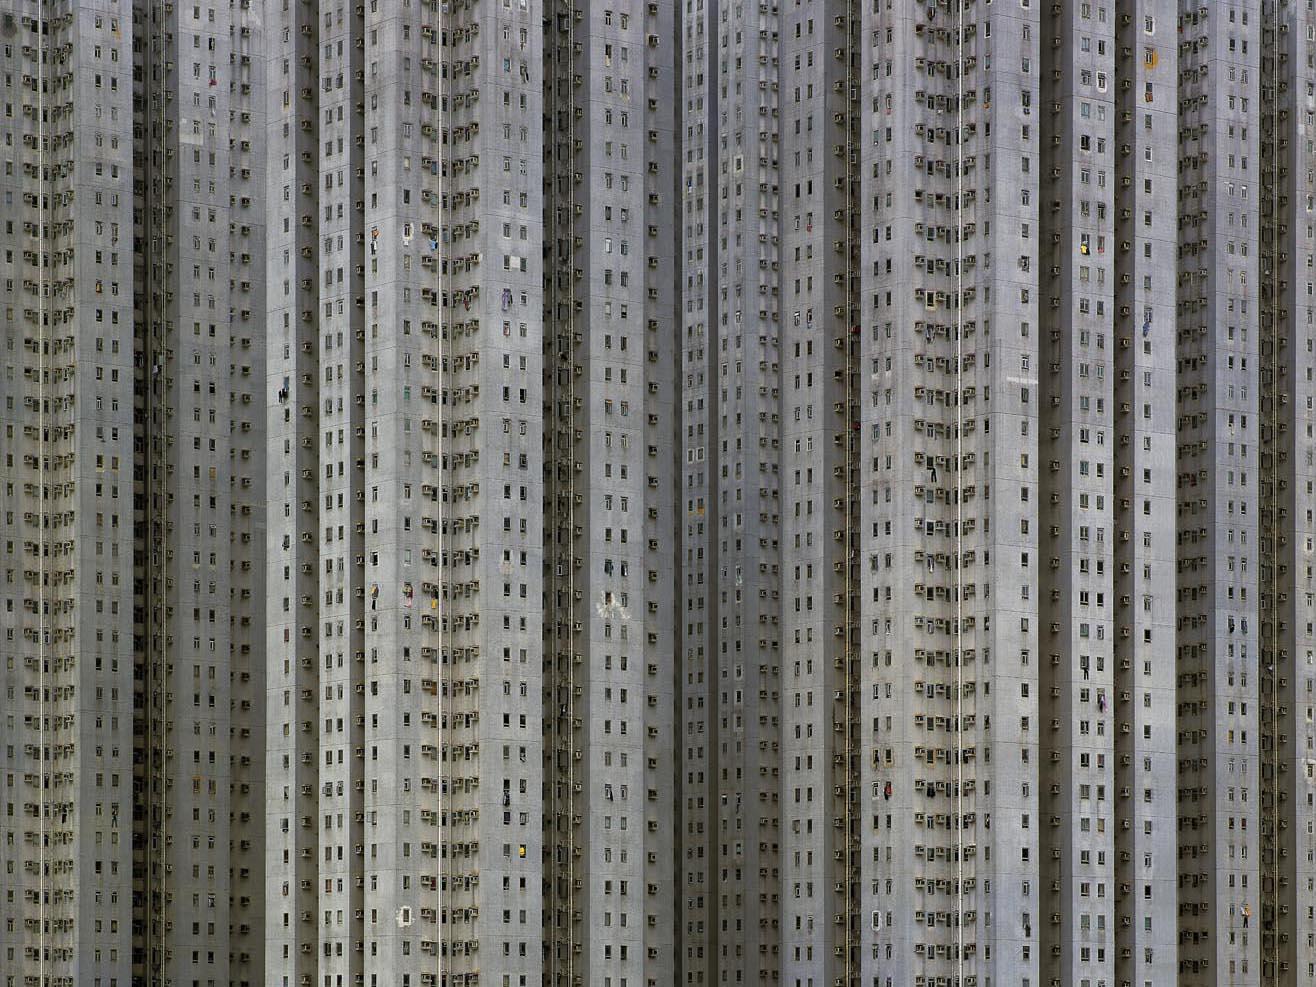 Michael WOLF (1954 – 2019, Germany)
Architecture of Density #76, 2006
C–print
Sheet 101.6 x 132.1 cm (40 x 52 in.) 
Edition of 9, plus 2 AP; Ed. no. 2/9
Print only

– Michael Wolf

Michael Wolf was born in 1954 in Munich, Germany. He worked and